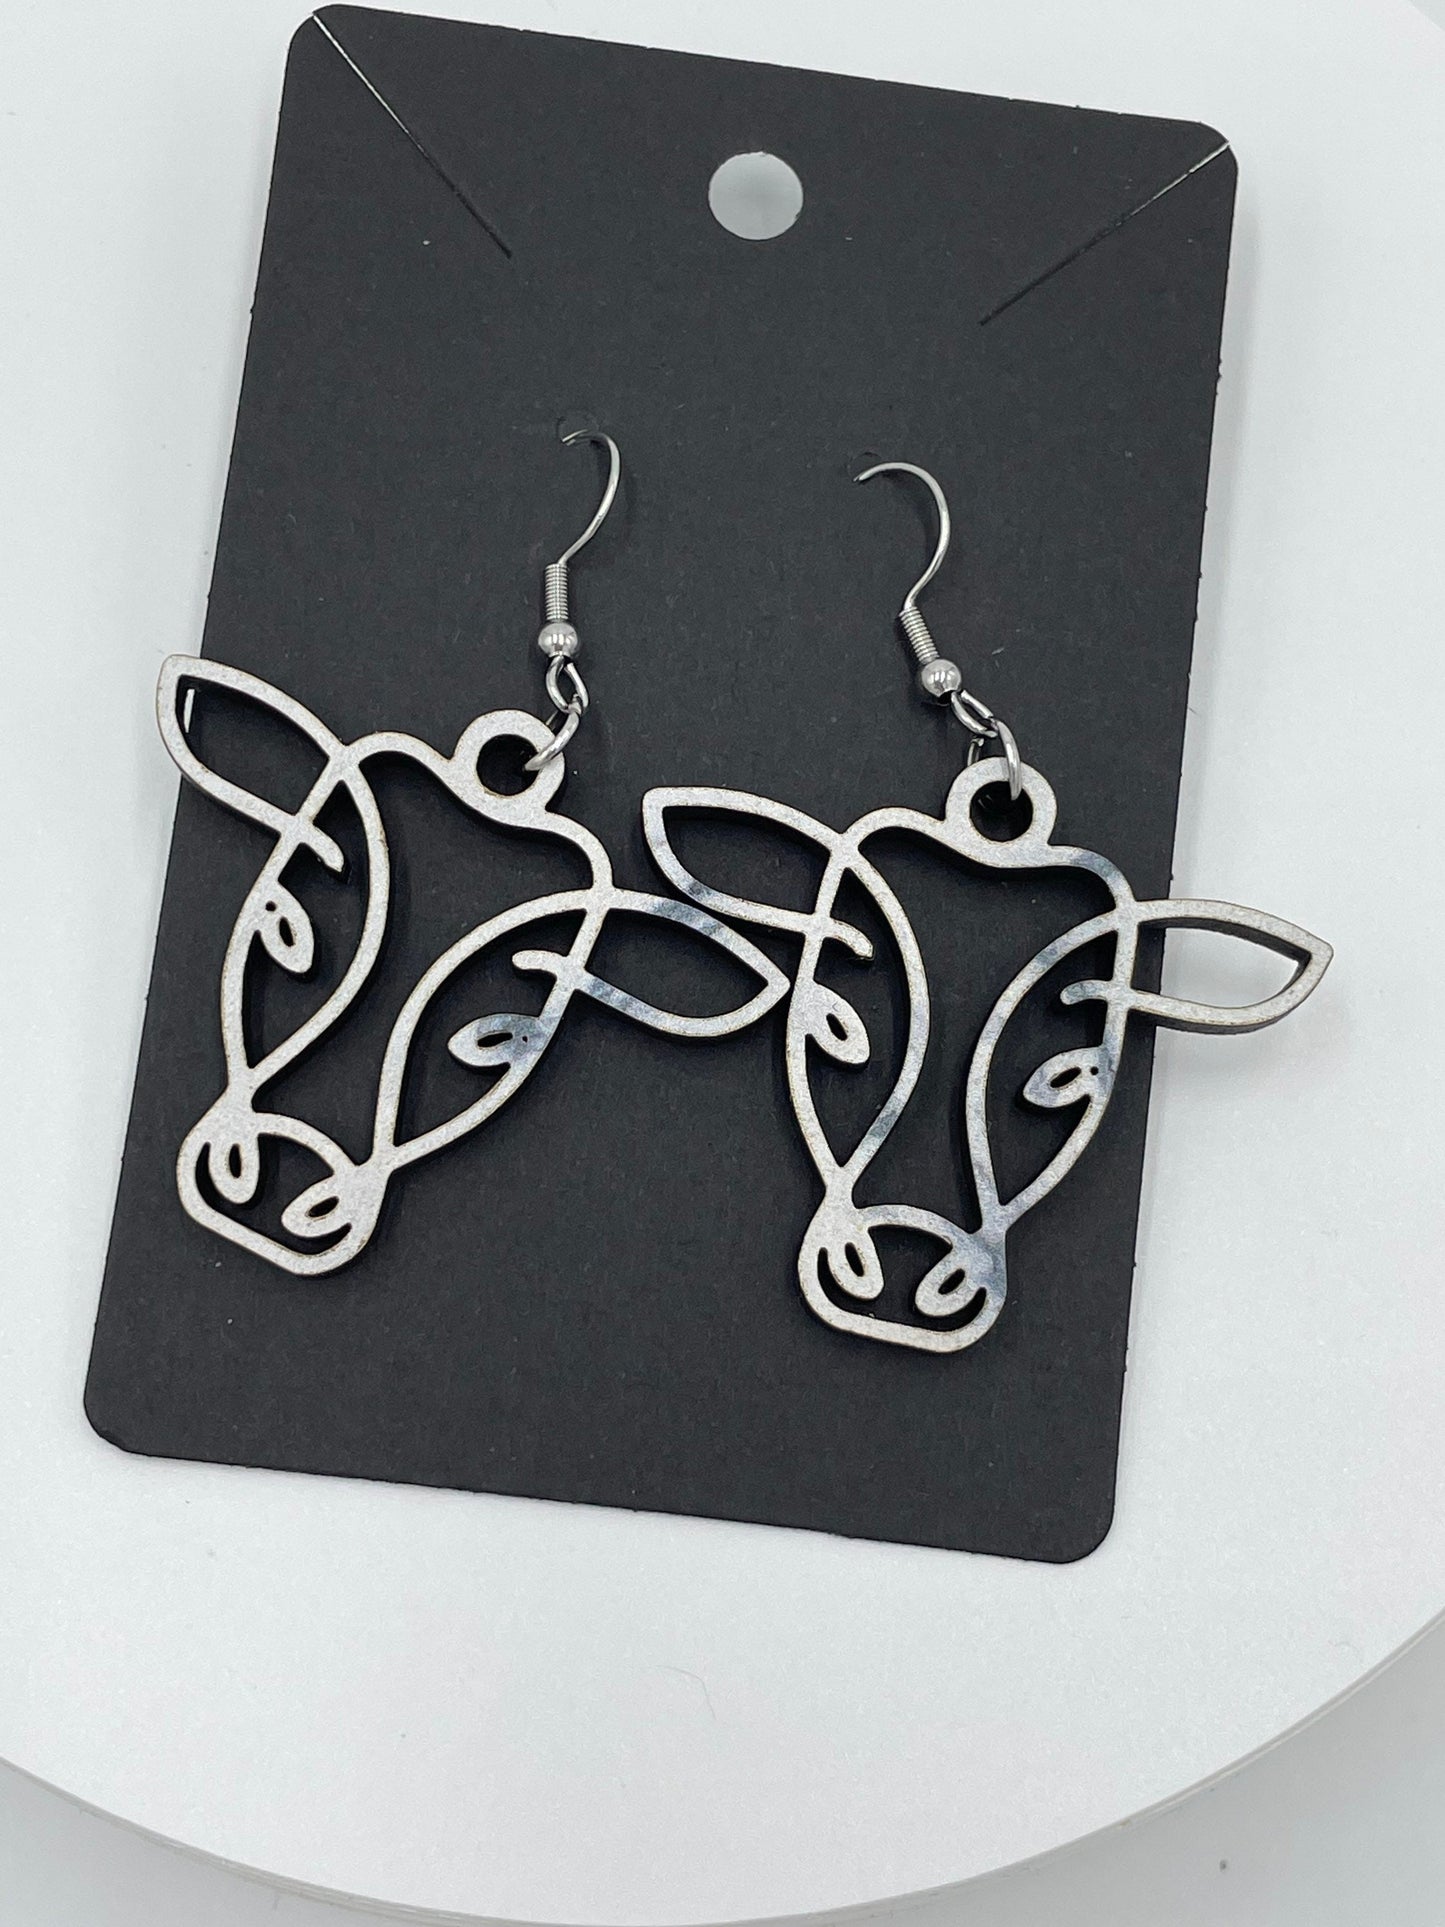 Cow Earrings, Black and White, Hypoallergenic Stainless Steel